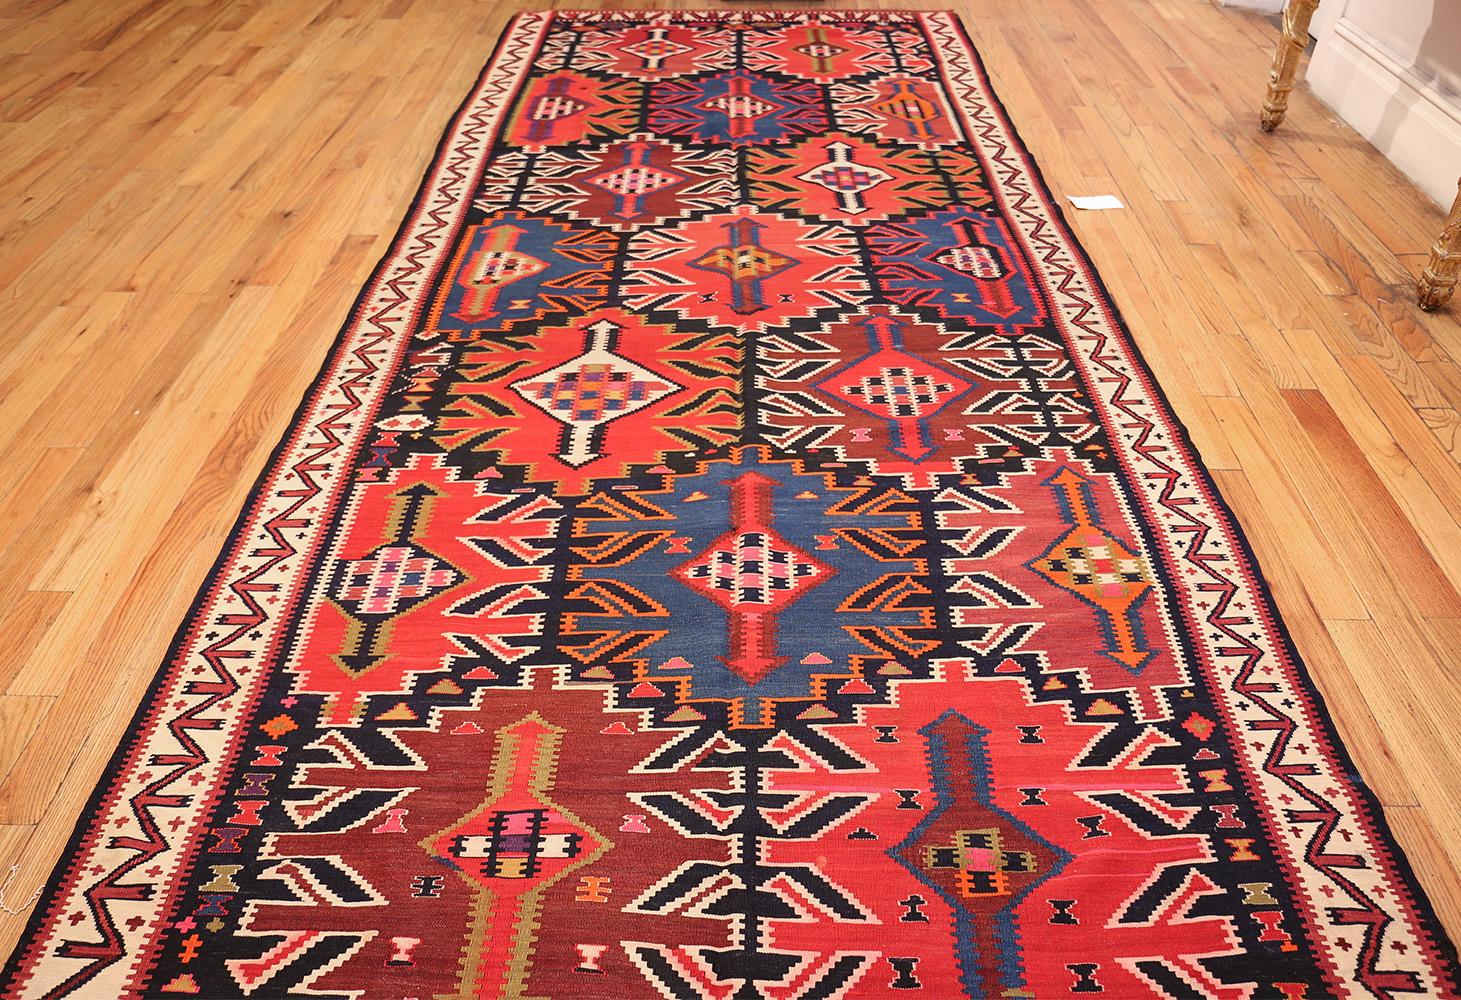 Antique tribal Caucasian Kuba Kilim rug, country of origin: Caucusus, date circa early 20th century. Size: 5 ft 7 in x 12 ft 9 in (1.7 m x 3.89 m)

True to the distinct tribal style of Caucasian Kuba Kilims, this rug combines extravagant colors with